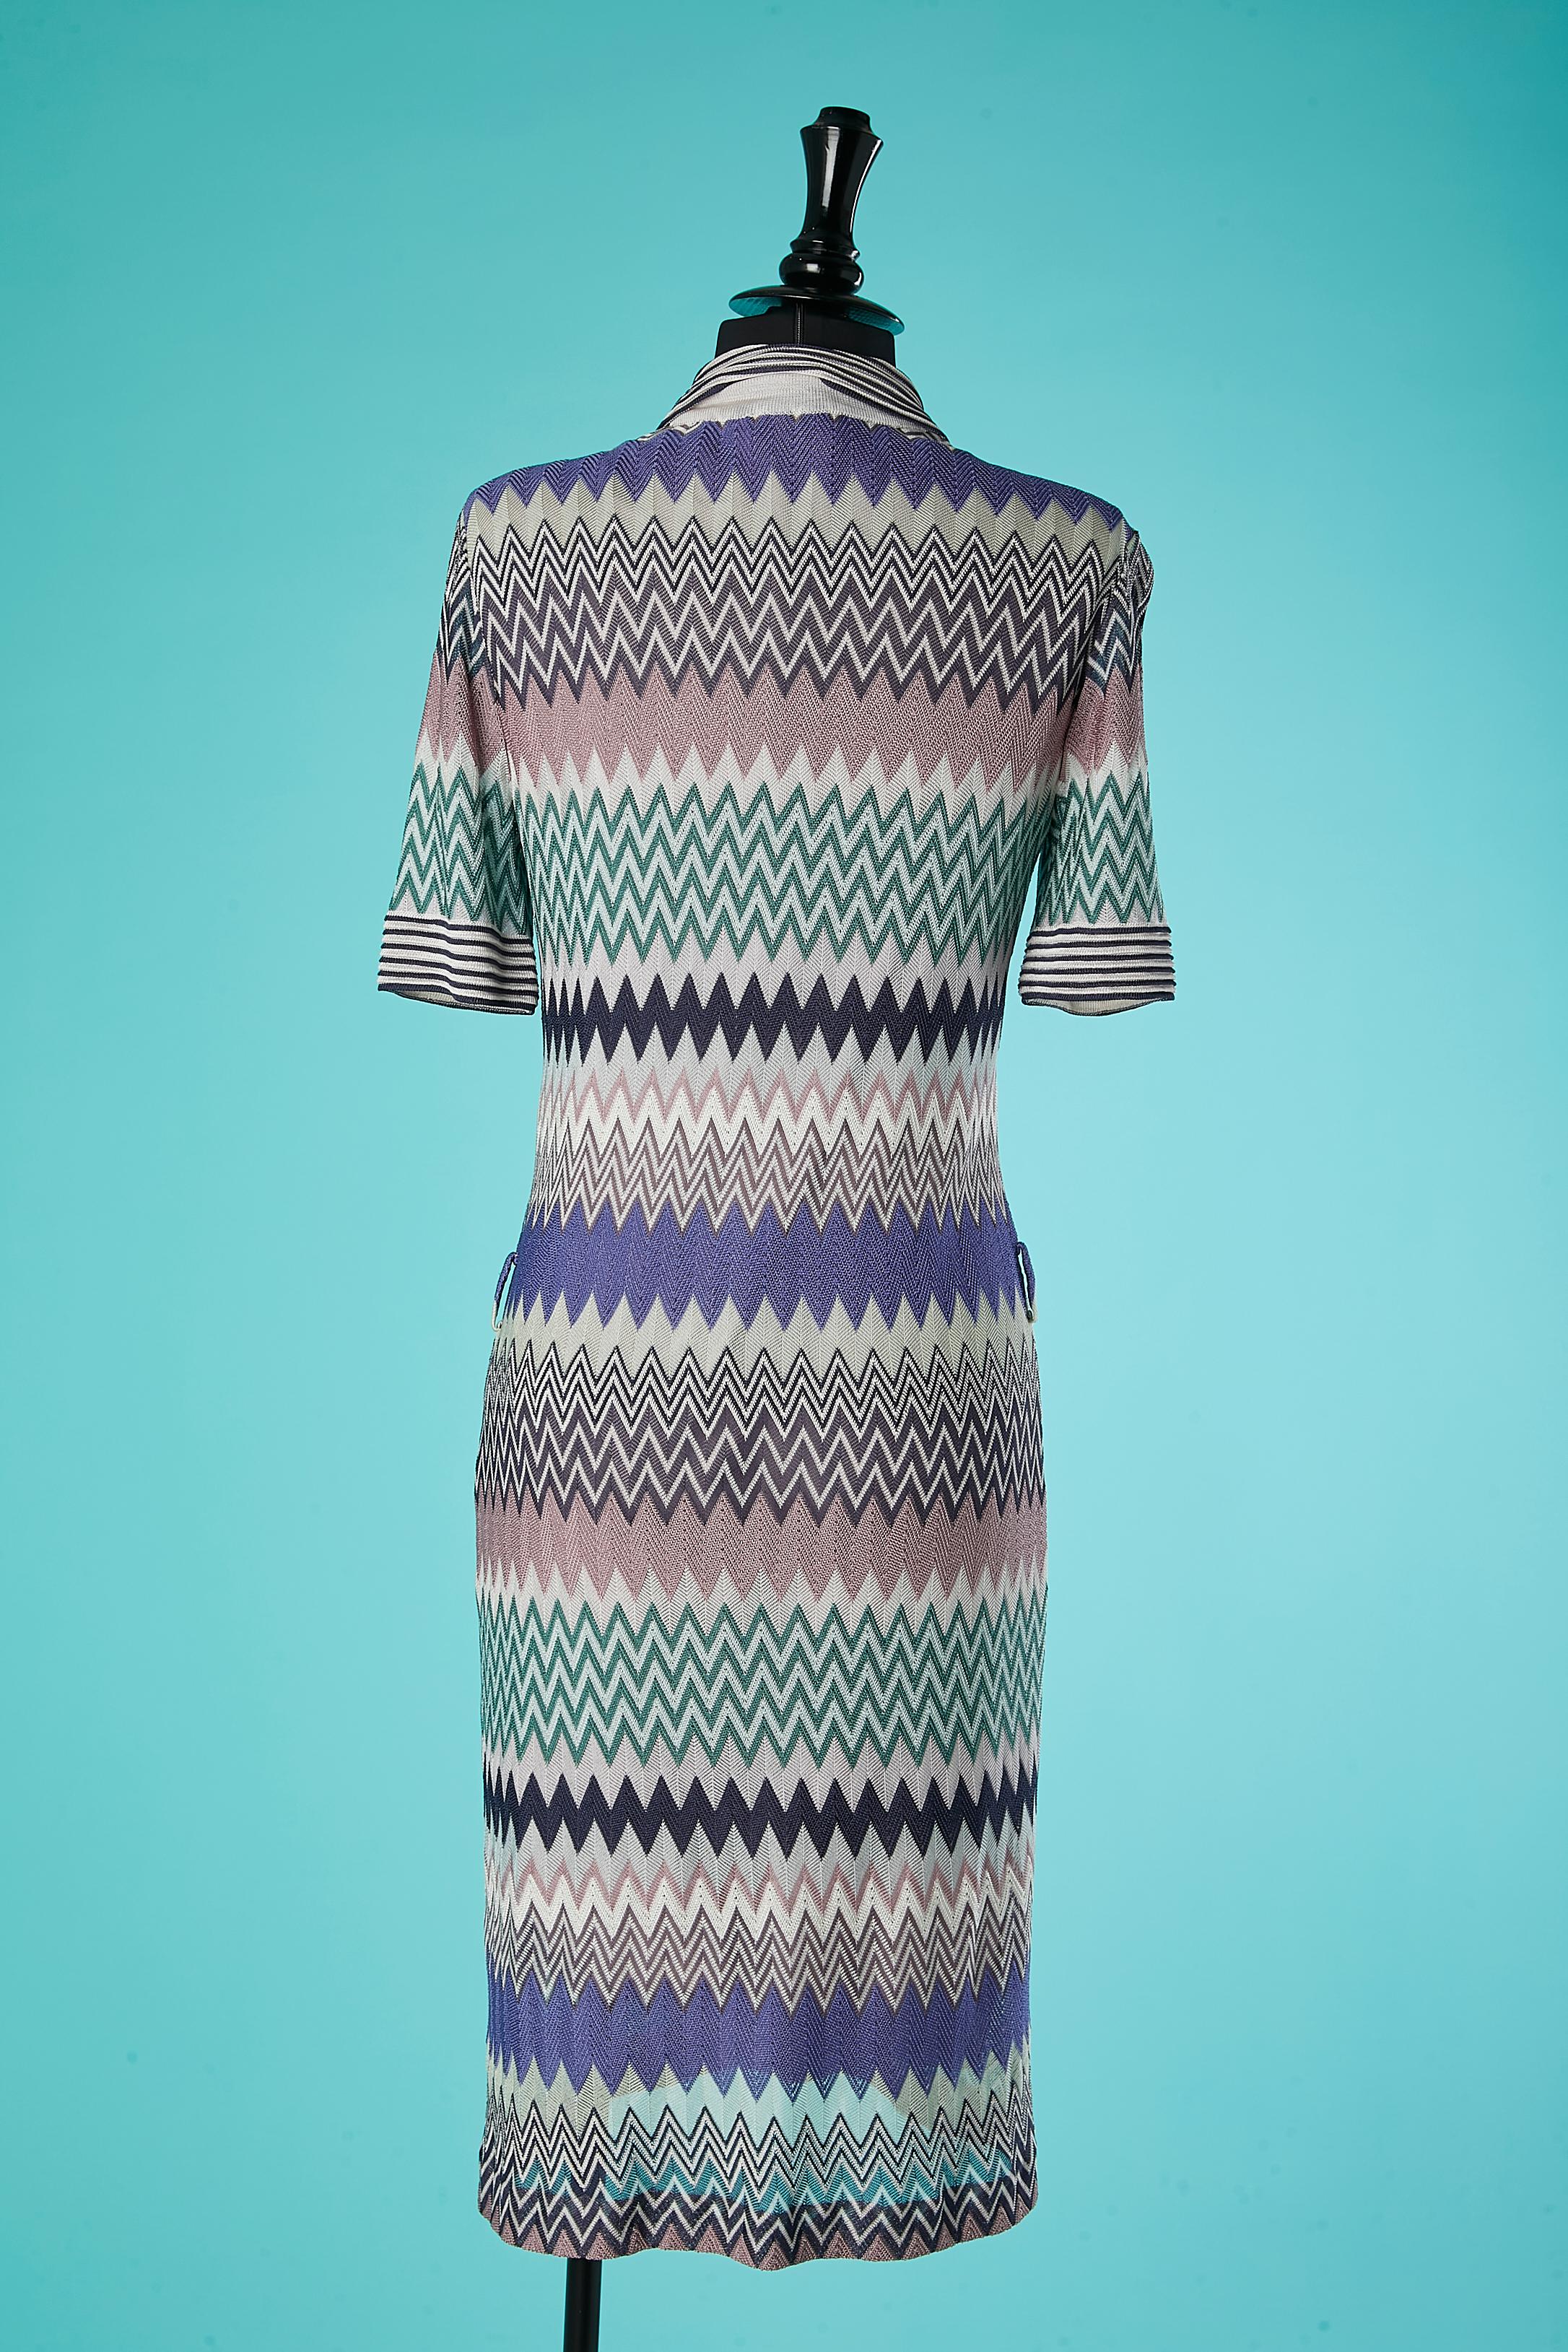 Jacquard knit day dress with graphic pattern Missoni  For Sale 2